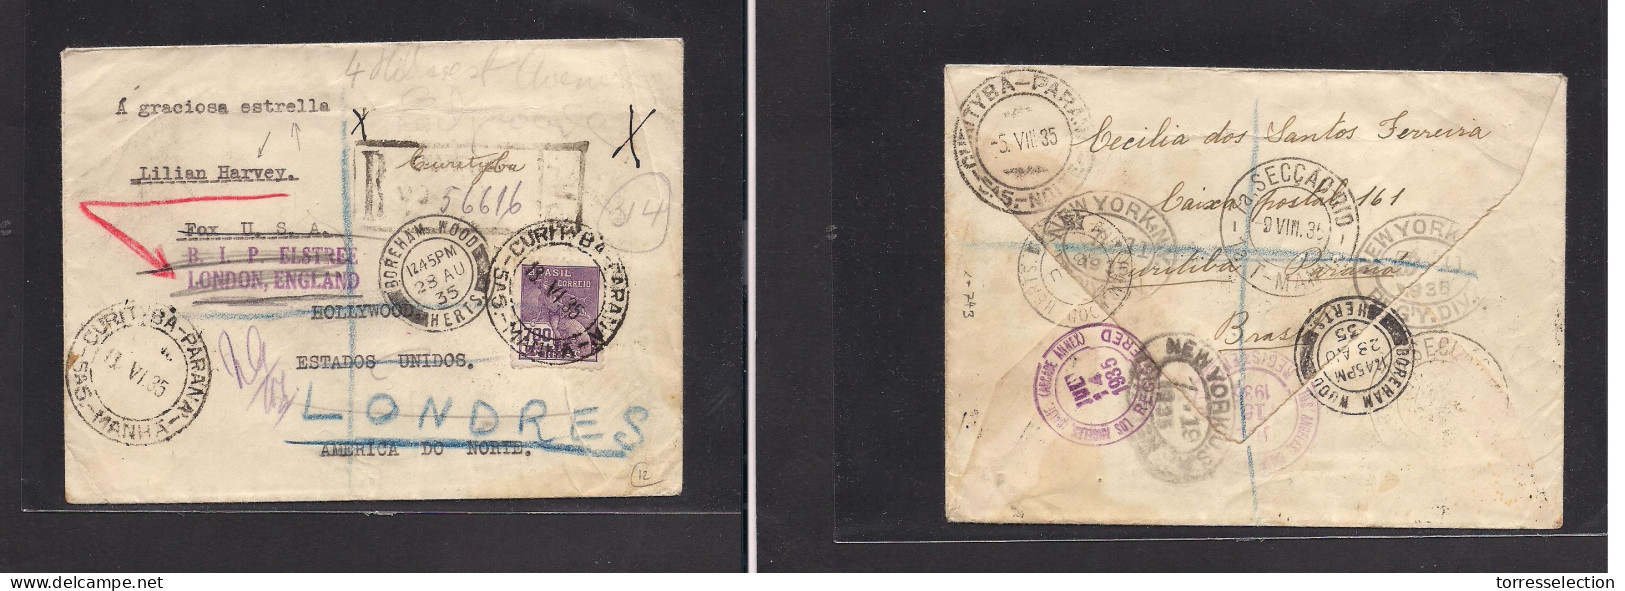 BRAZIL. Brazil - Cover - 1935 Curytiba To USA To London Registr Mult Fkd Env Nice 700rs Single Fking Env. Easy Deal. - Other & Unclassified